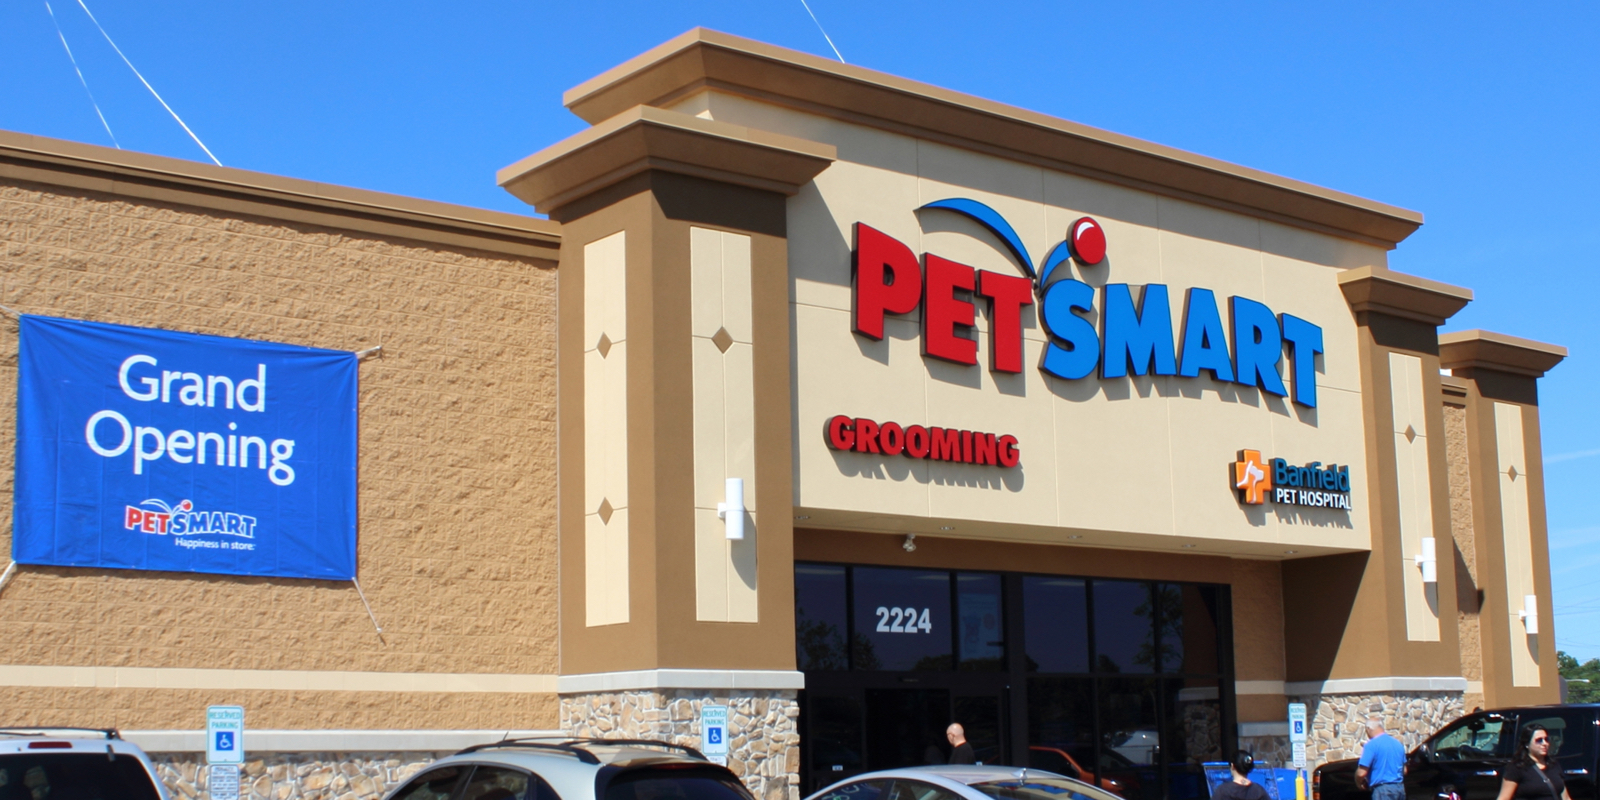 Today only you can get 7 off a 7 purchase or more at PetSmart with